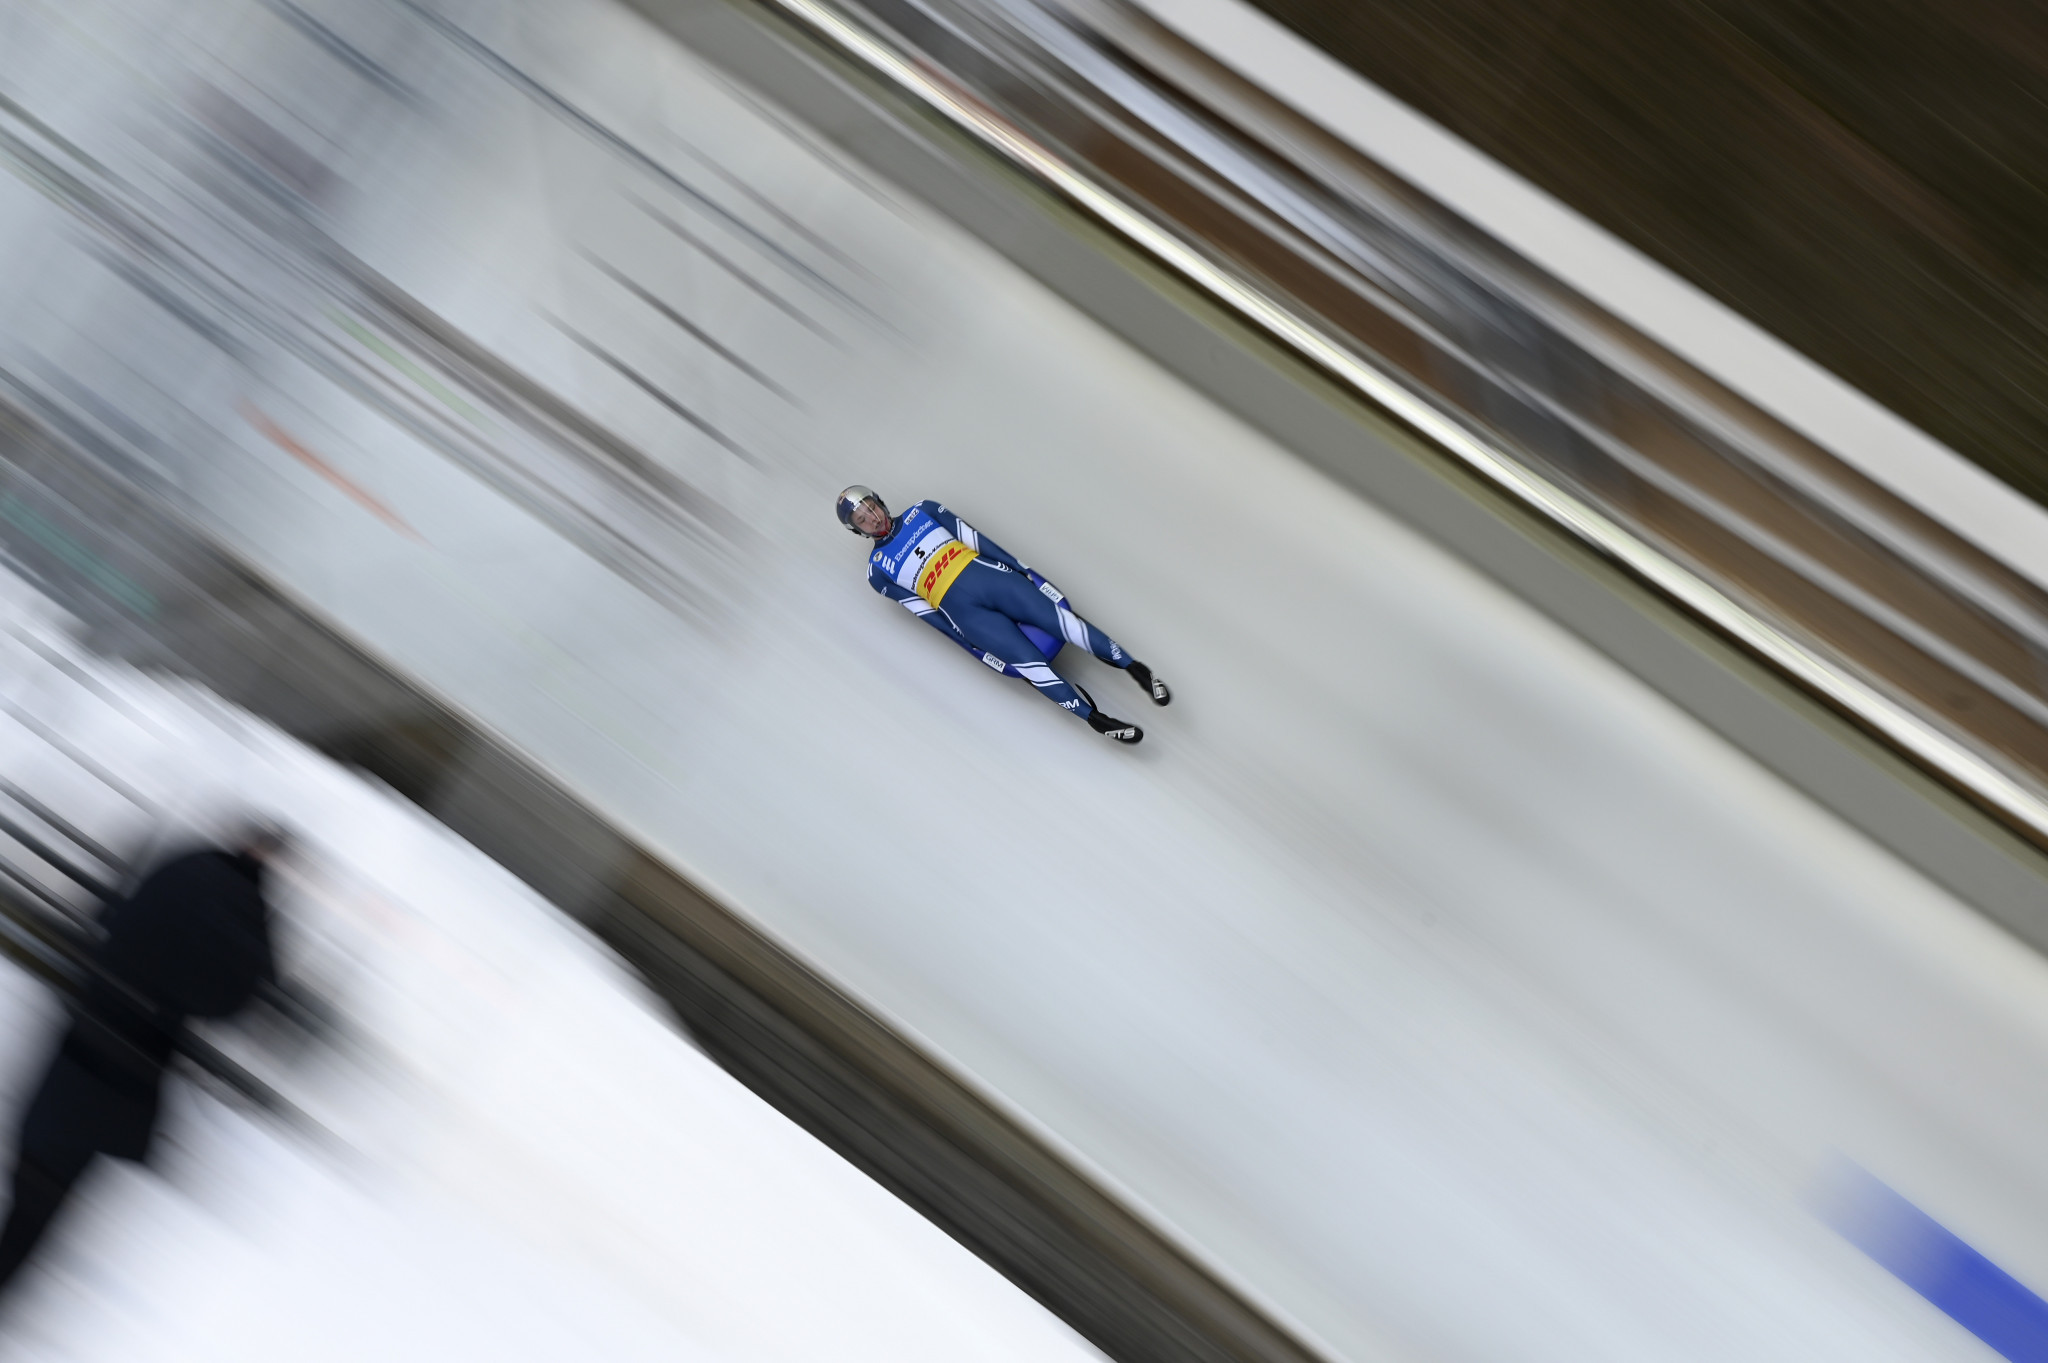 The Russian Luge Federation claims its athletes are awaiting prize money from last season ©Getty Images